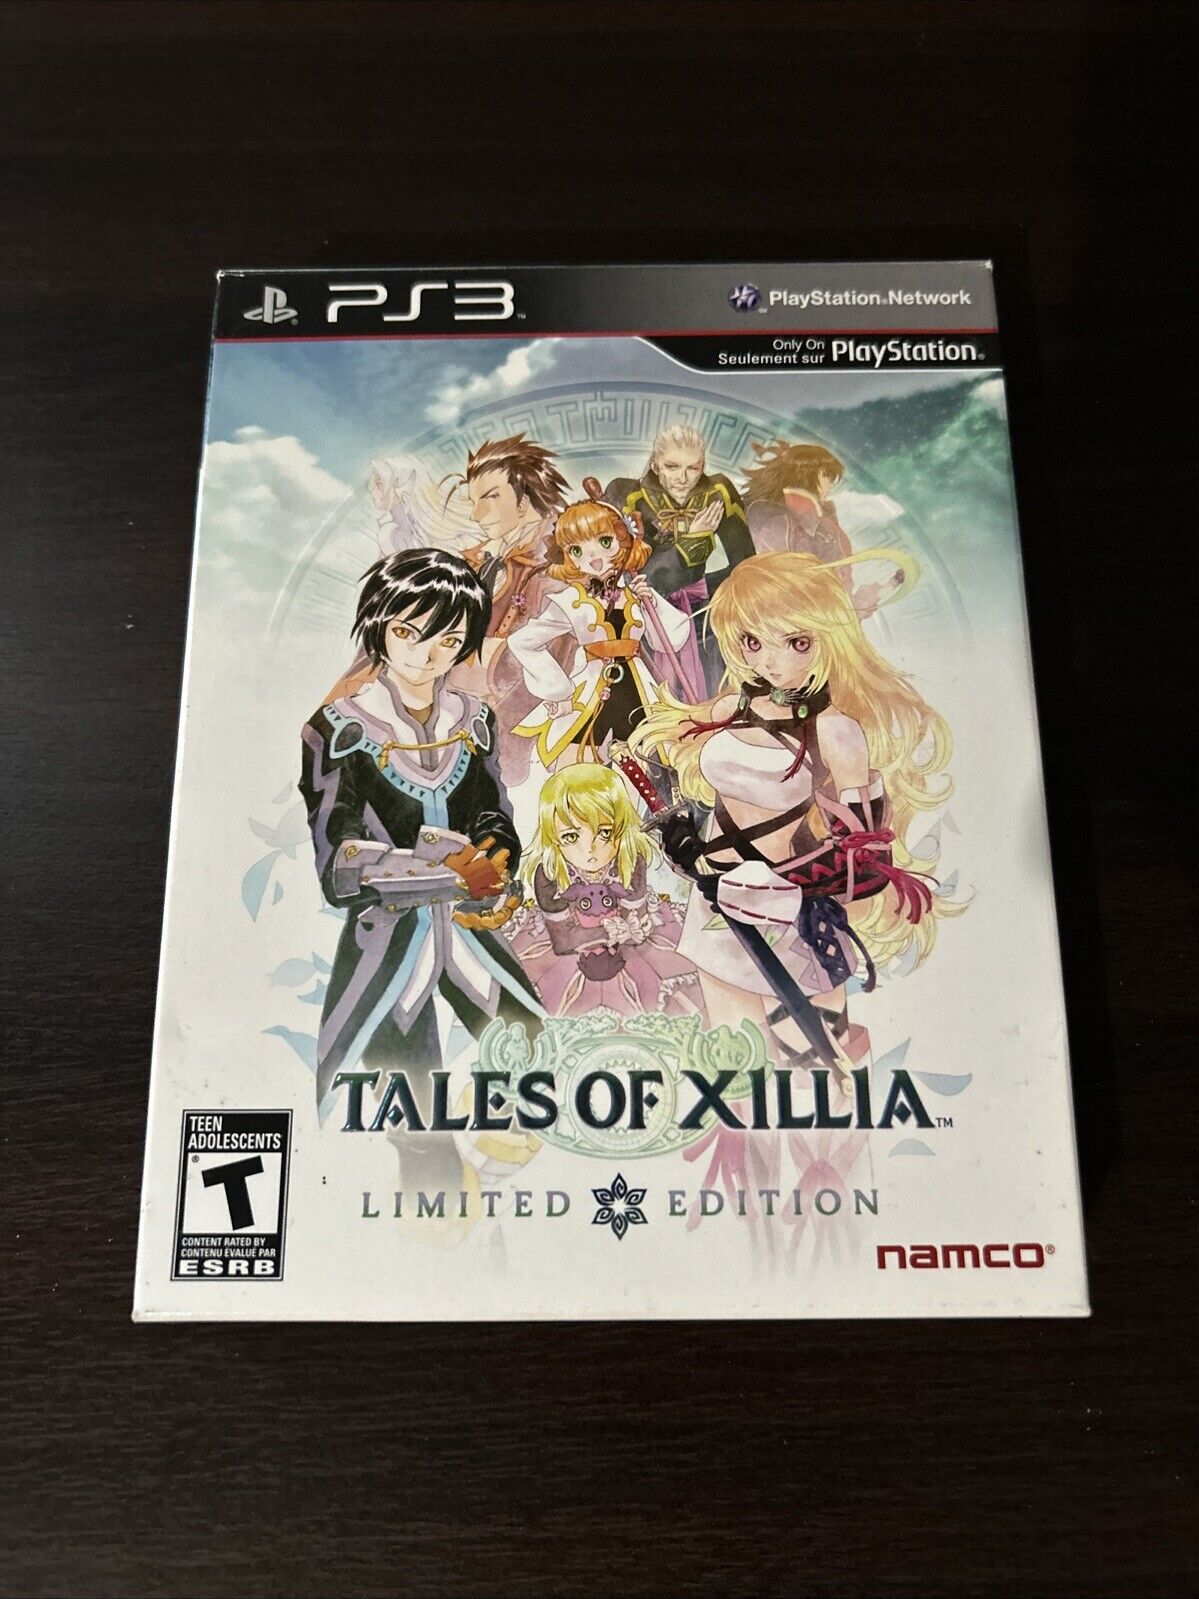 Tales of Xillia -Limited Edition (Sony PlayStation 3, PS3)